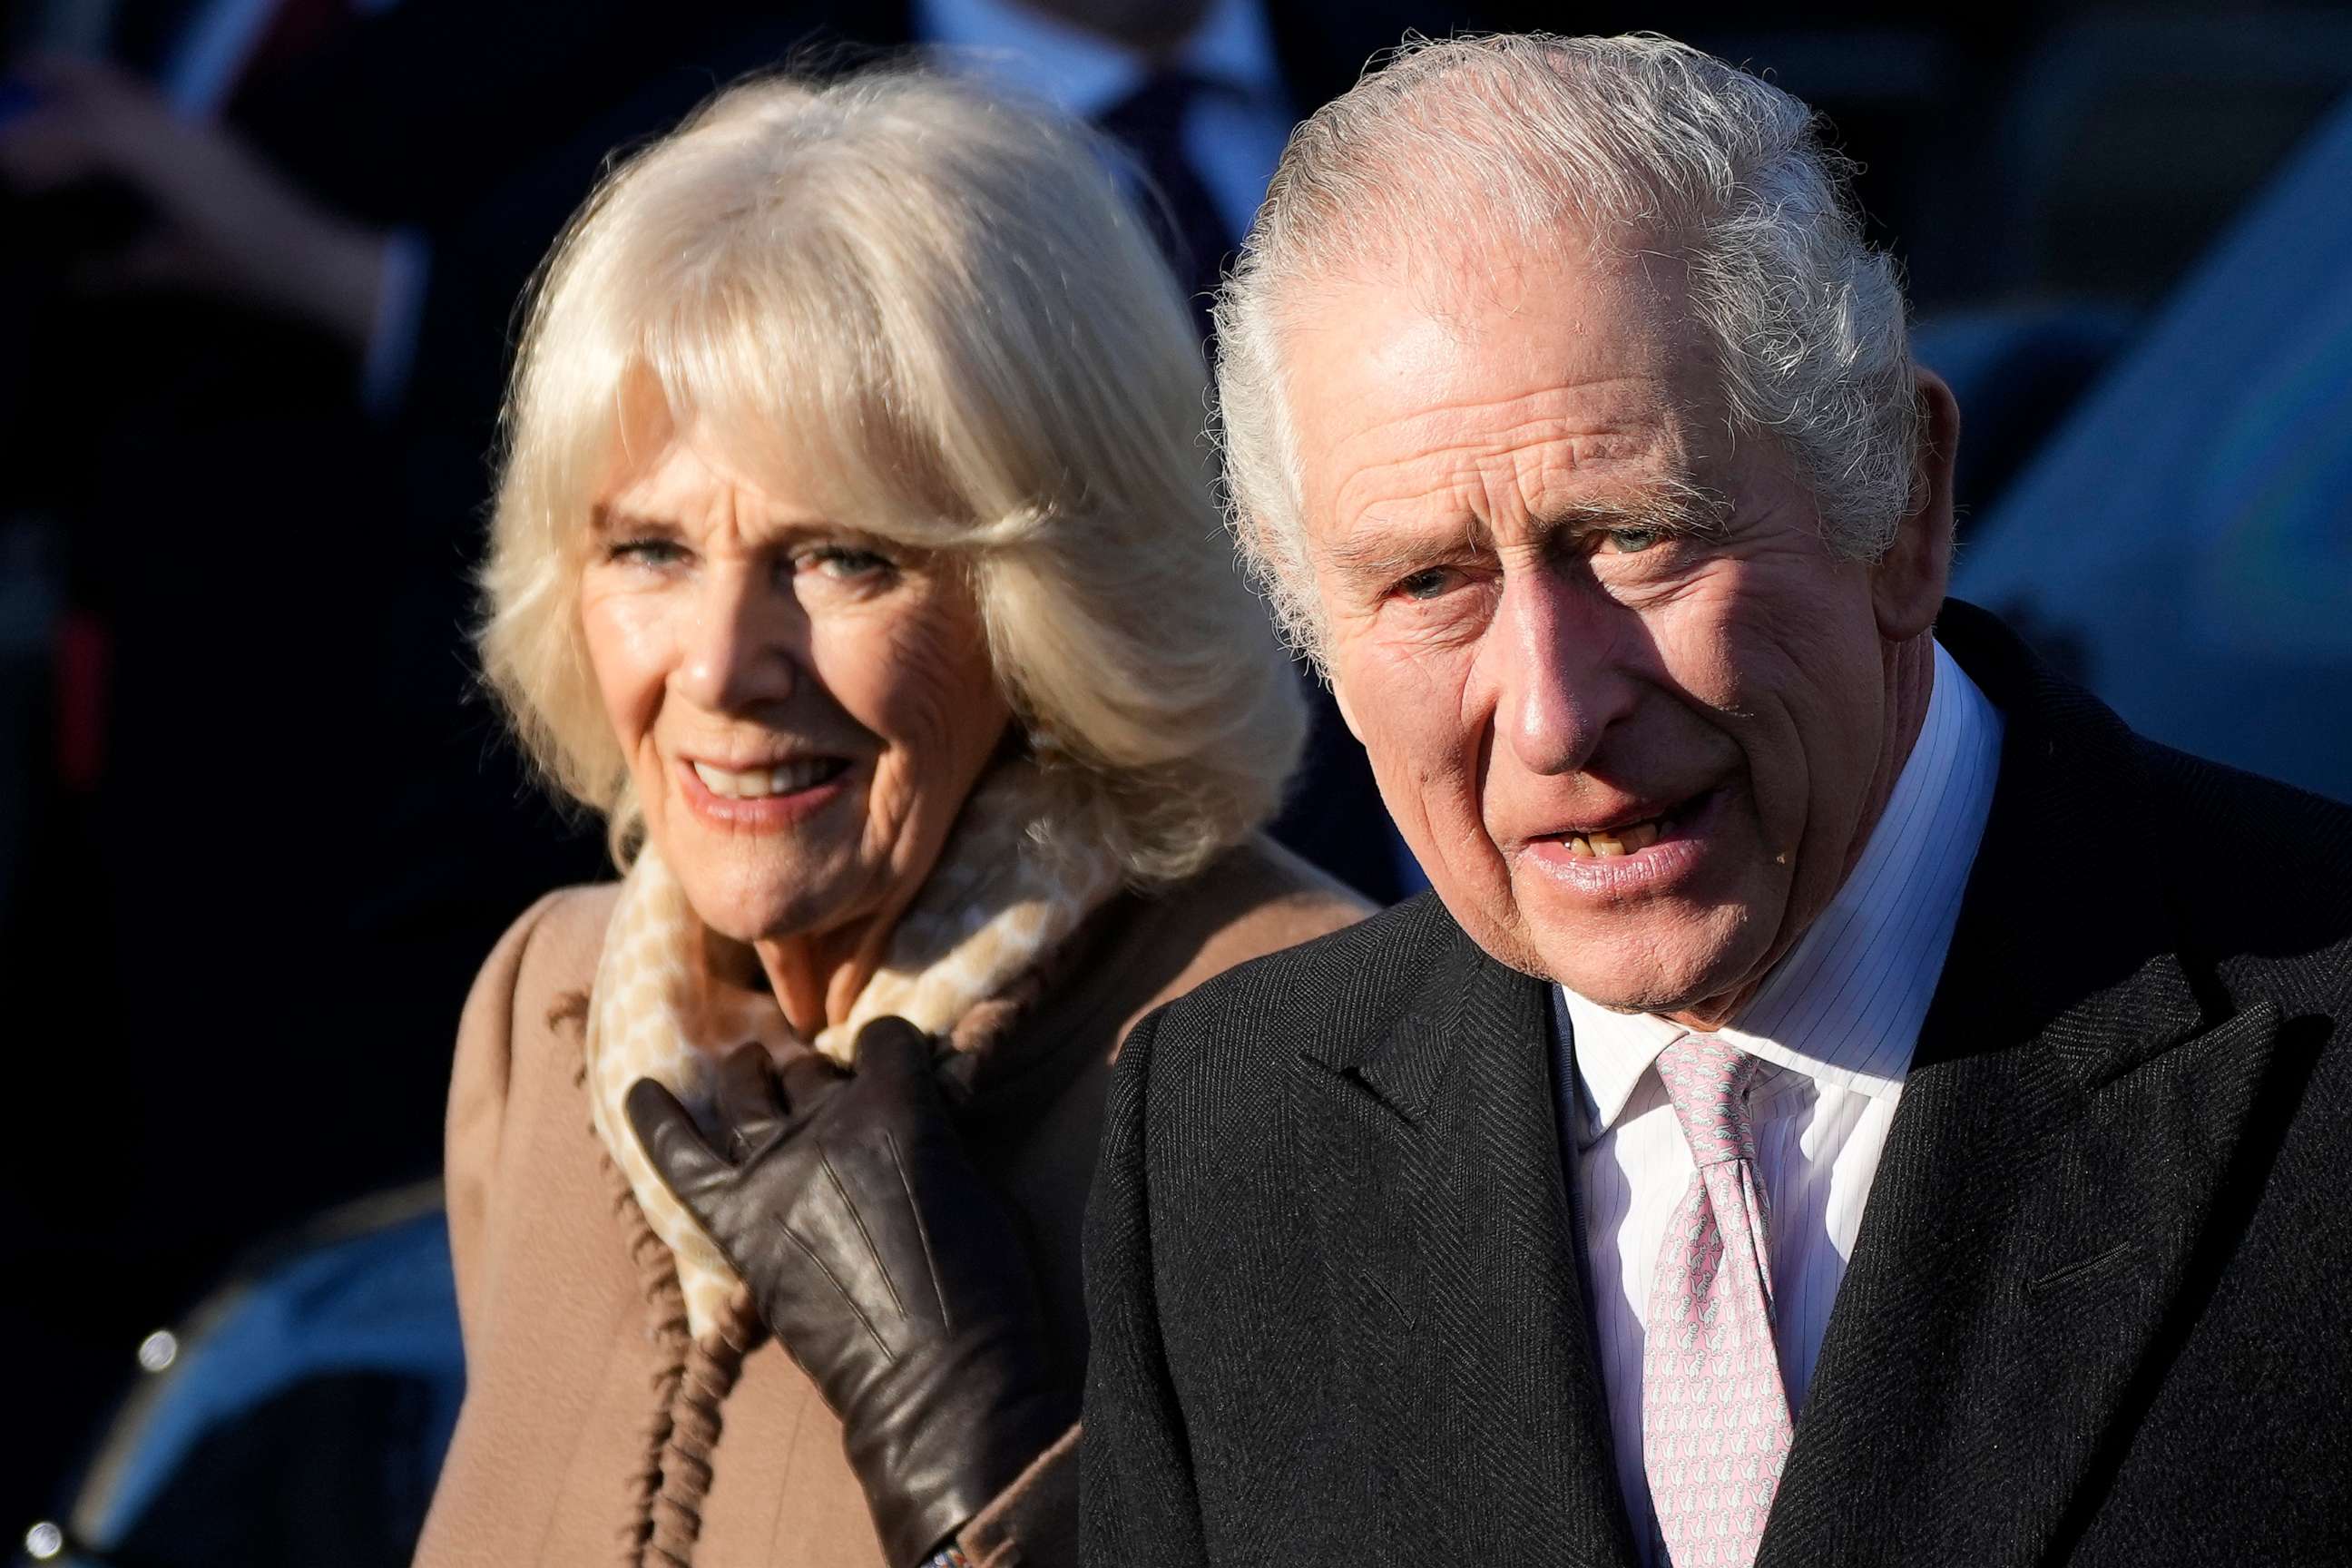 PHOTO: King Charles III and Camilla, Queen Consort leave Bolton Town Hall during a tour of Greater Manchester on January 20, 2023 in Bolton, United Kingdom.